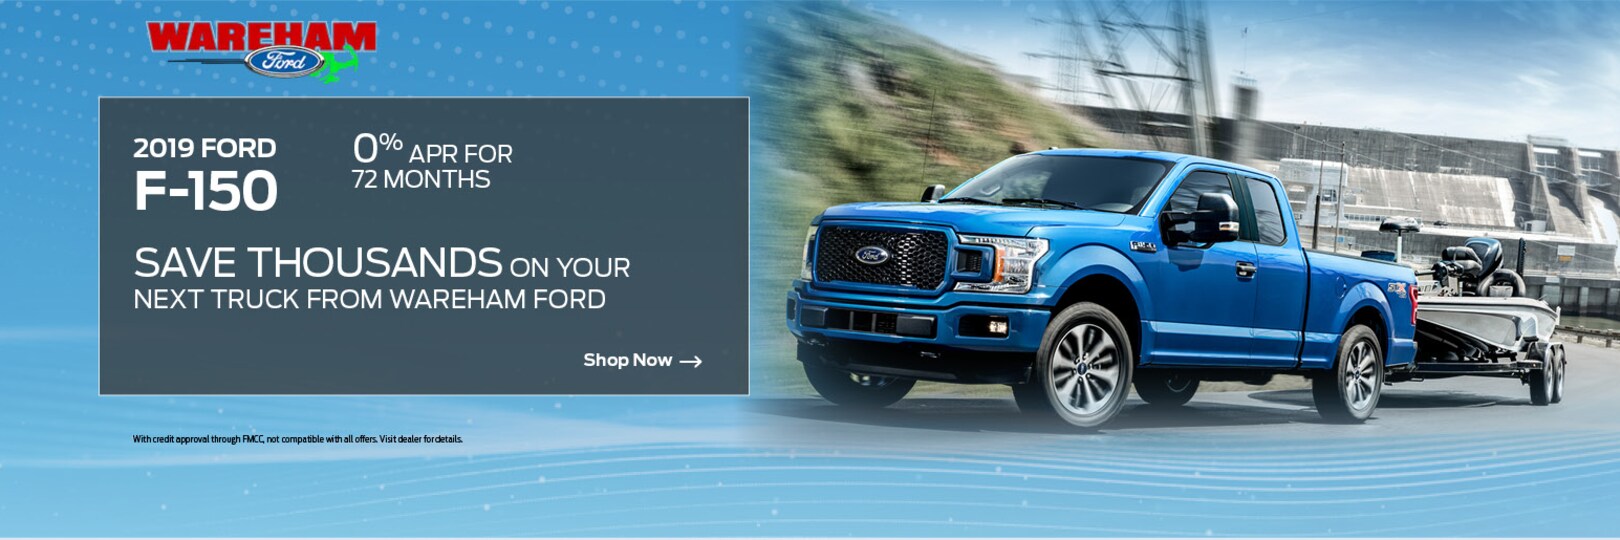 THE Trusted Ford Dealer in MA | Wareham Ford | Serving Hyannis, Raynham ...